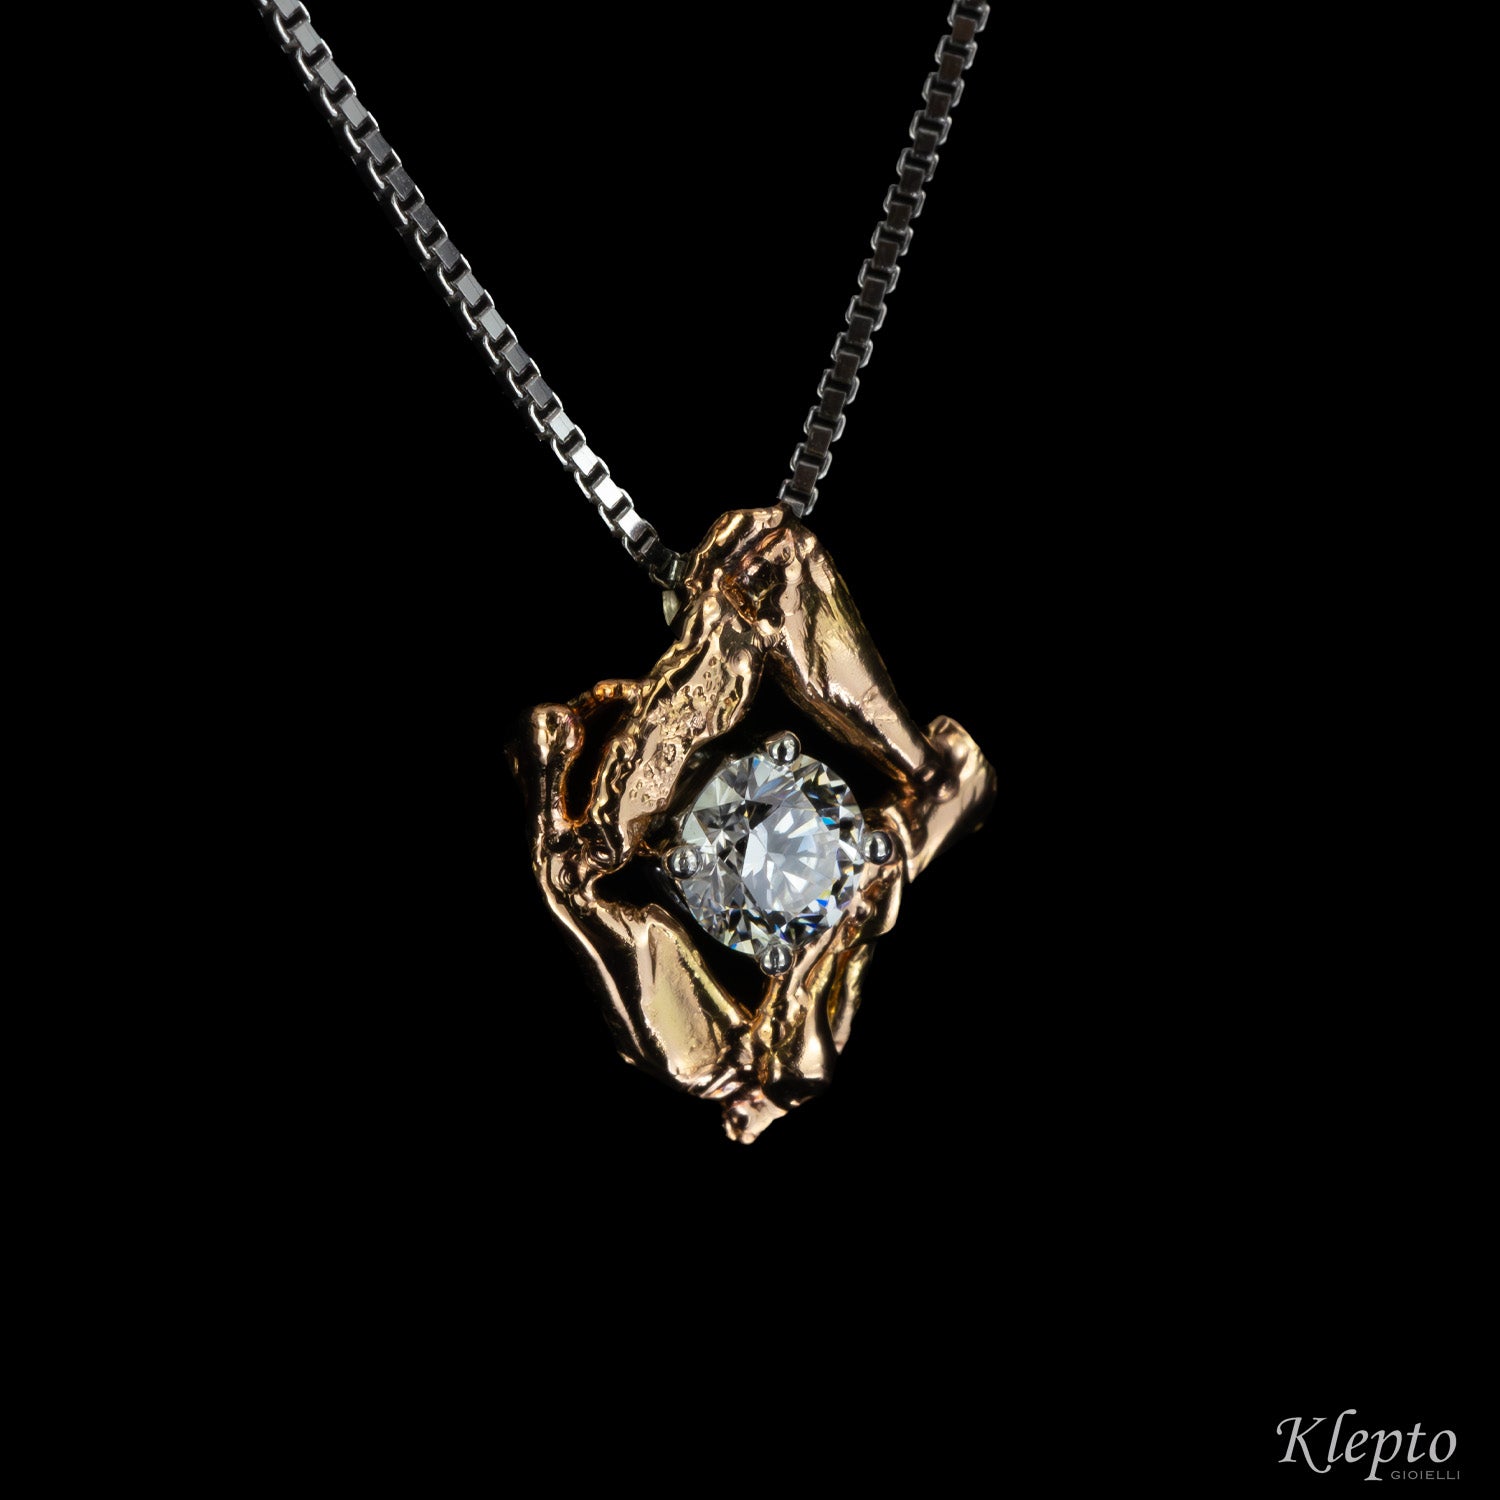 Pepita pendant in white and rose gold